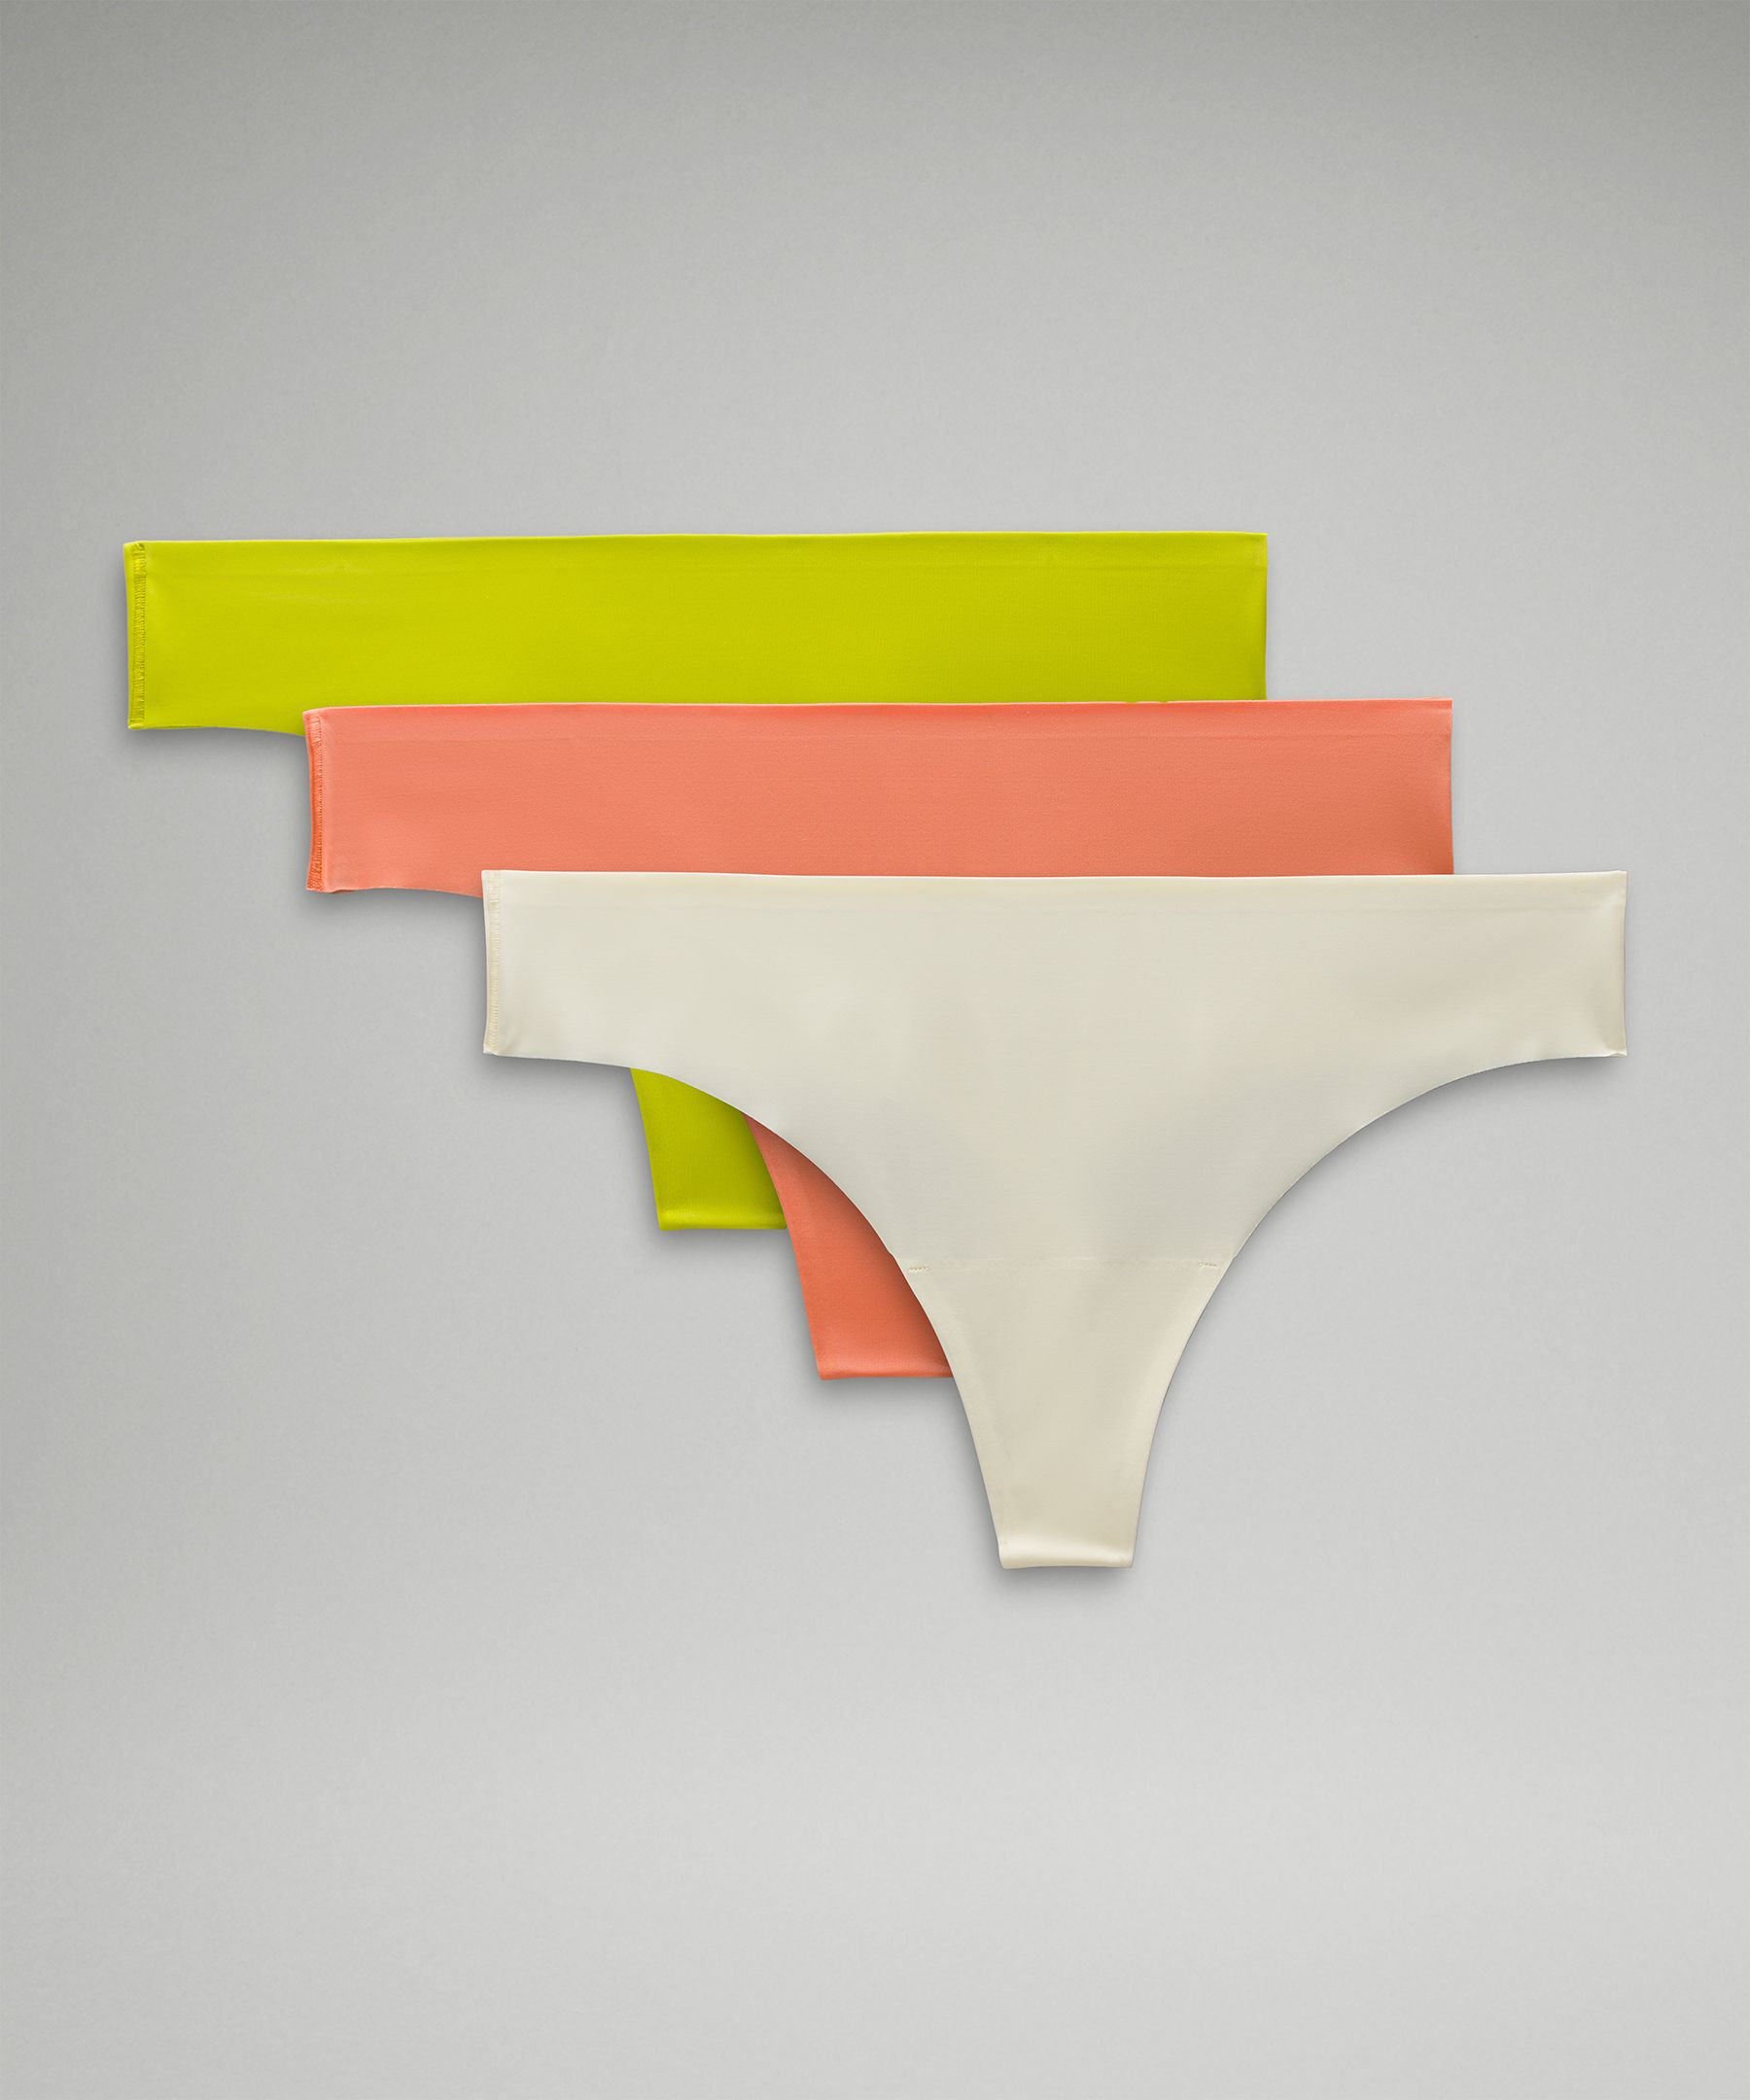 InvisiWear Mid-Rise Thong Underwear *3 Pack | Women's